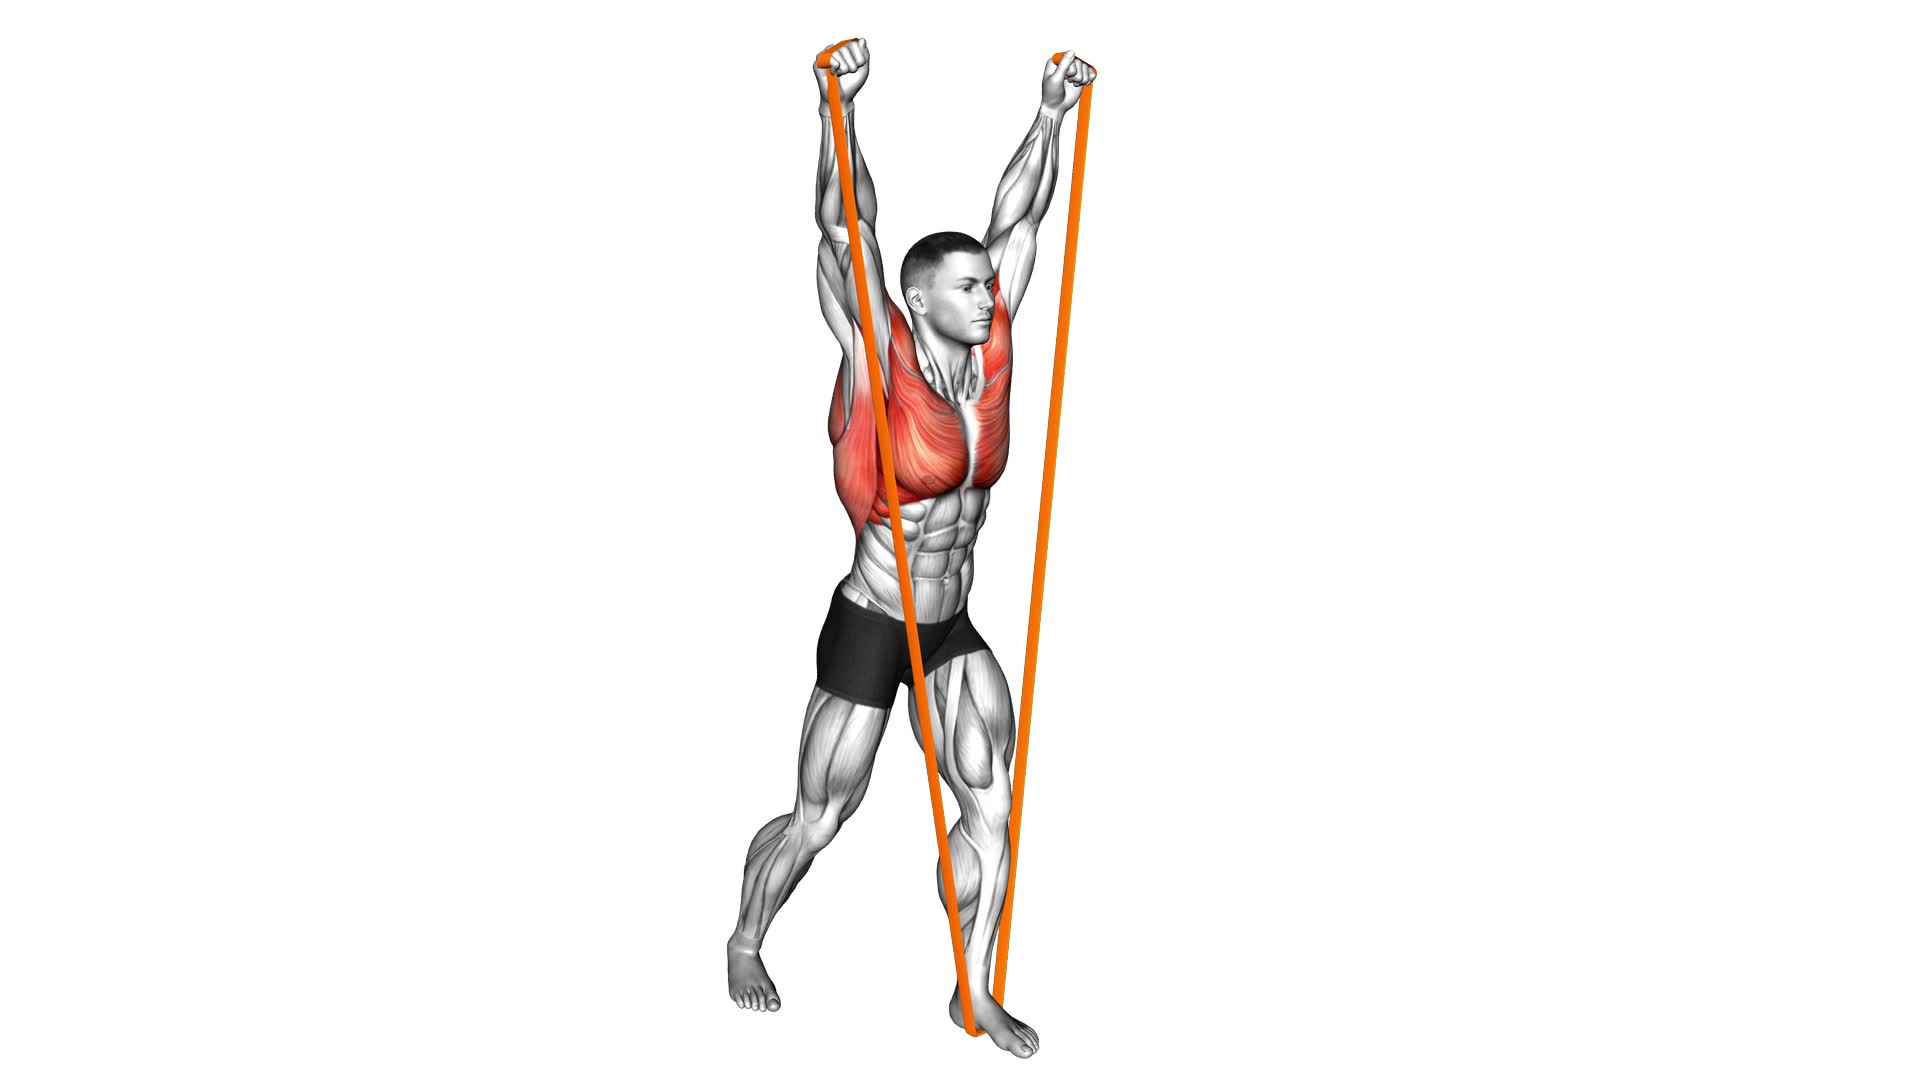 Resistance Band Standing Around the World (male) - Video Exercise Guide & Tips